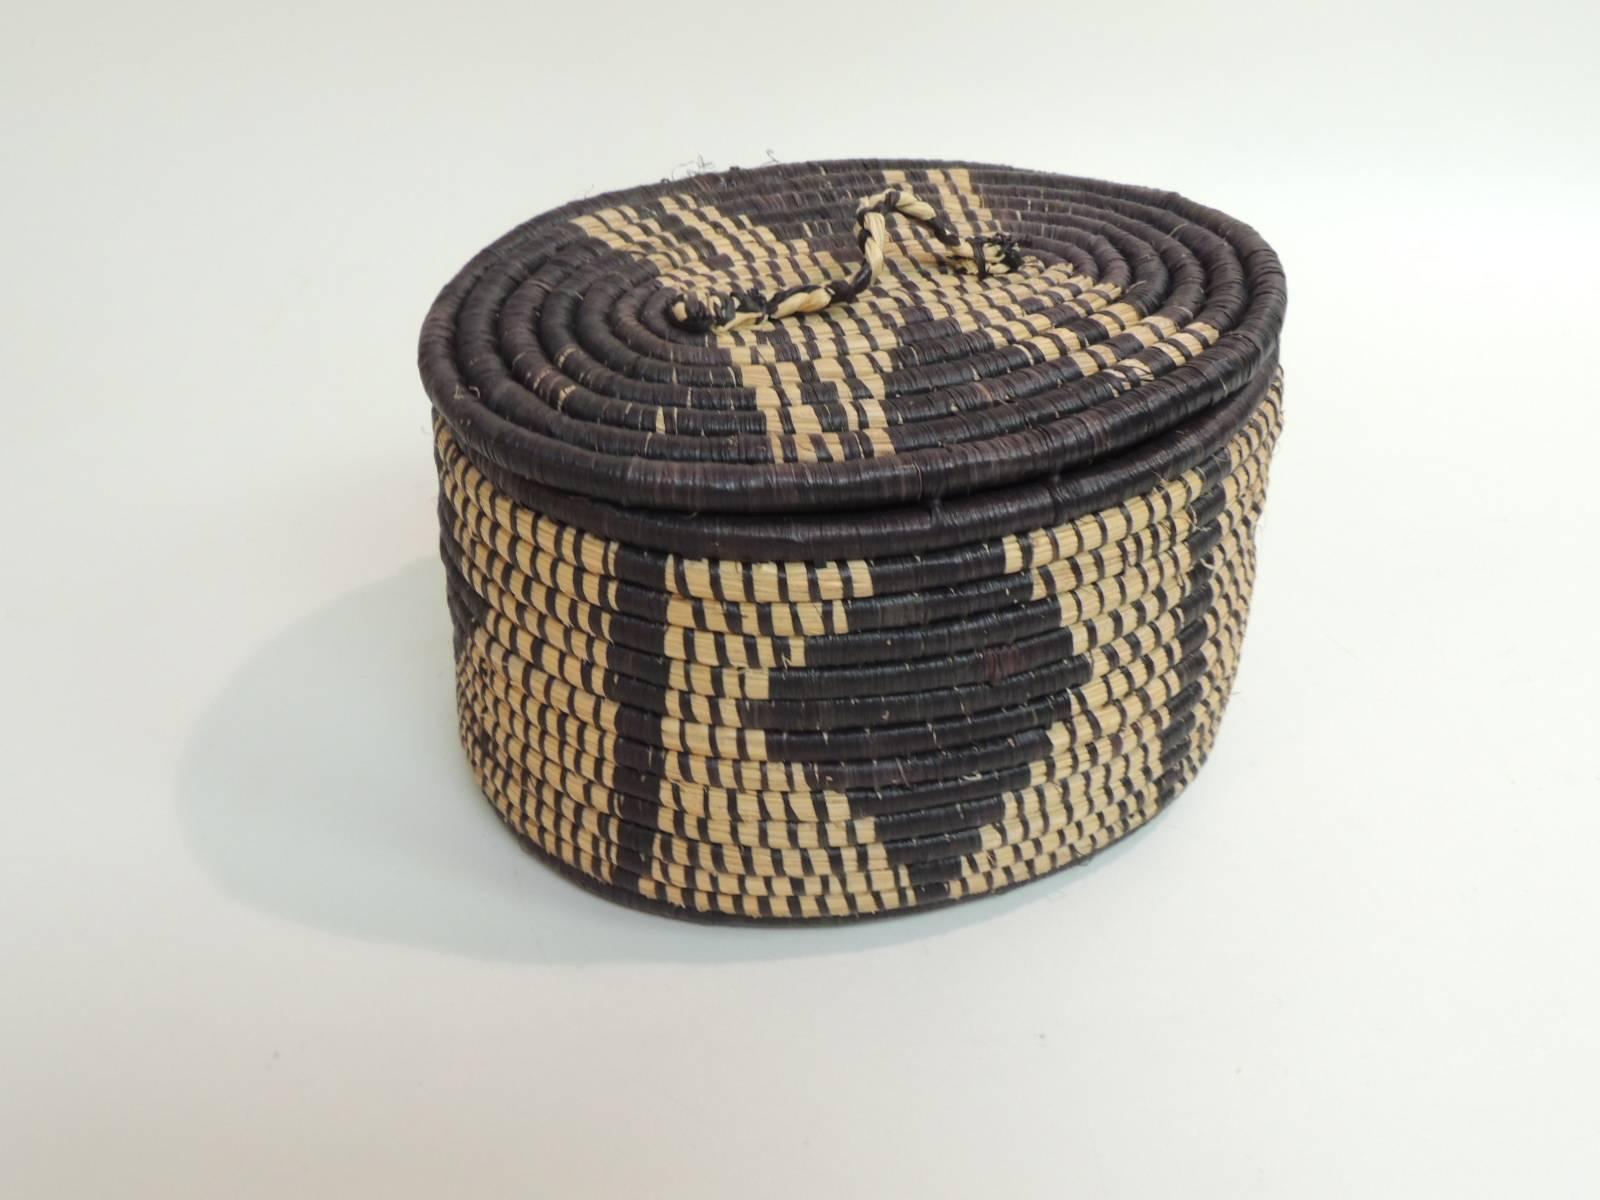 Tribal African Hand-Woven Oval Artisanal Basket with Lid